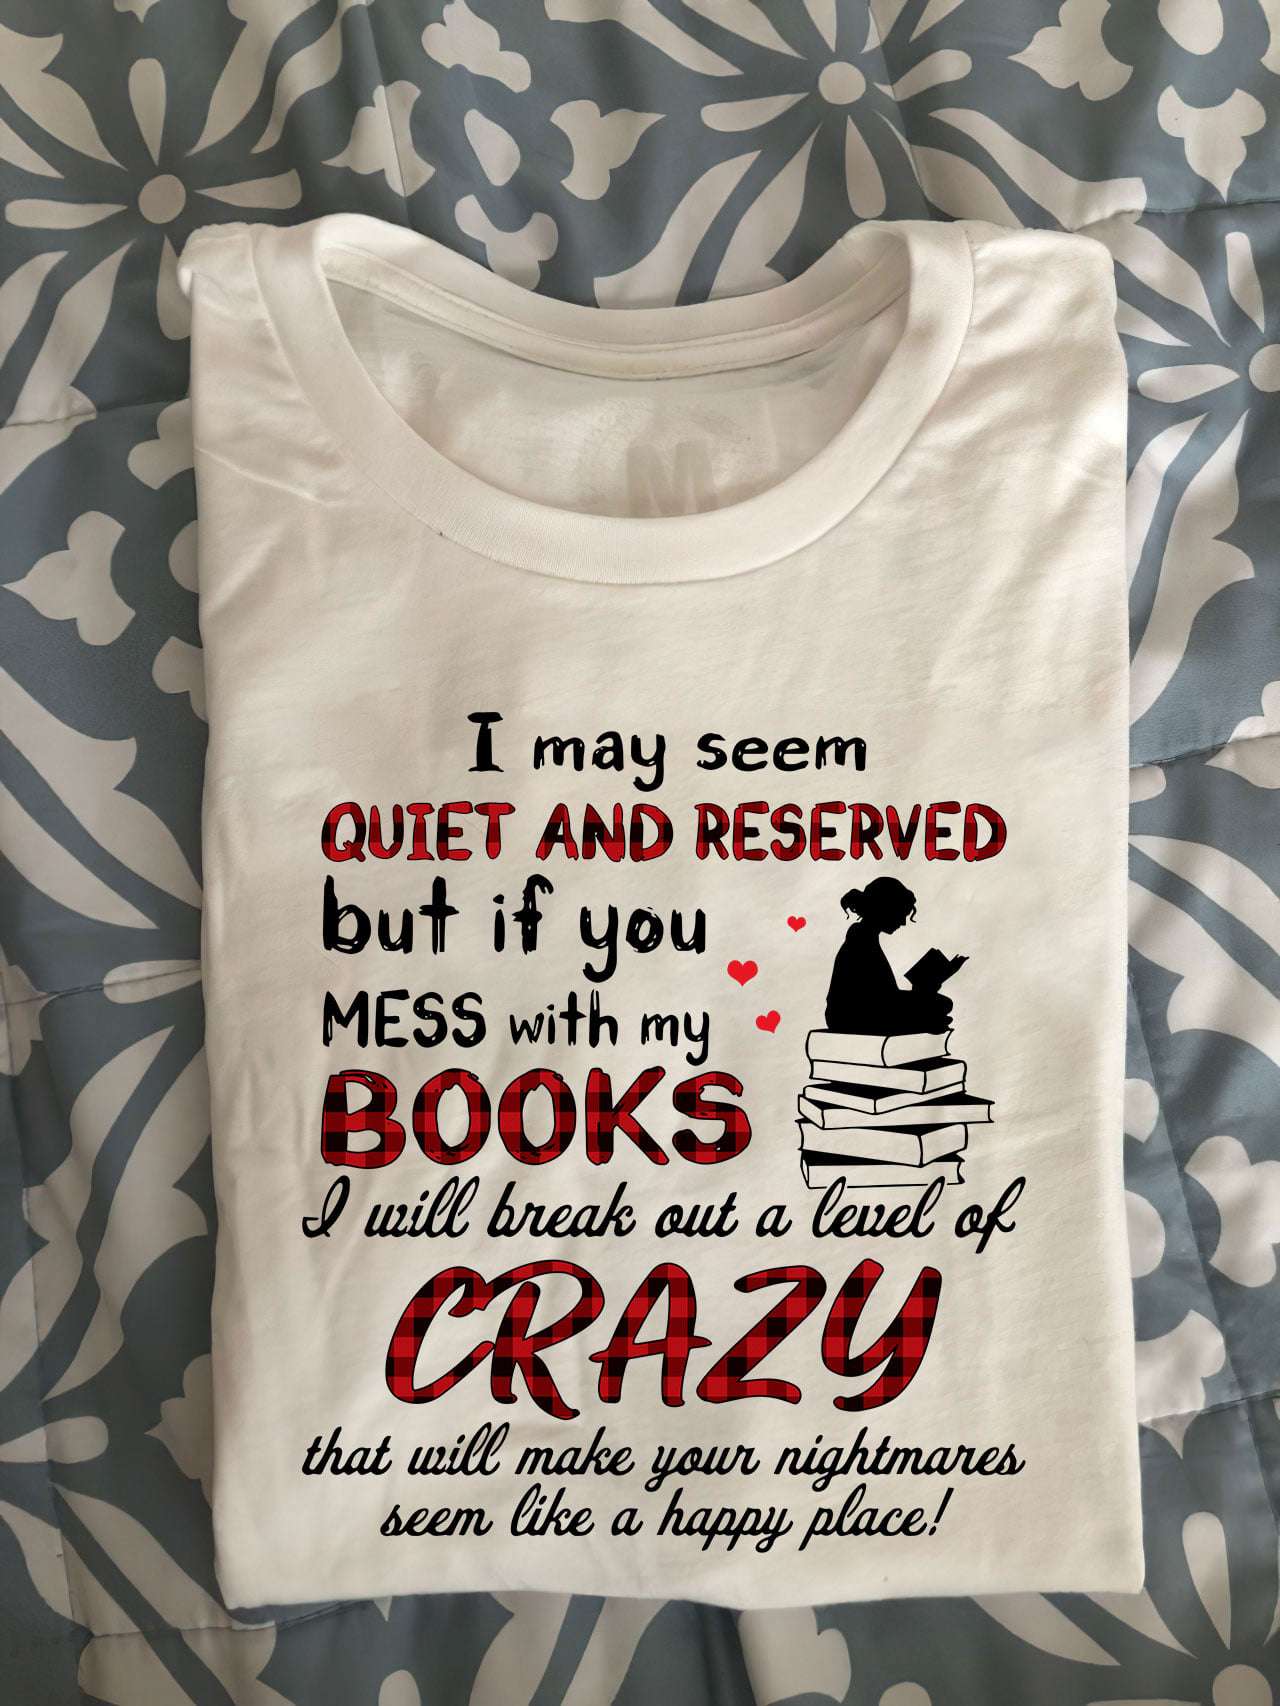 I may seem quiet and reserved but if you mess with my books i will break out a level of crazy